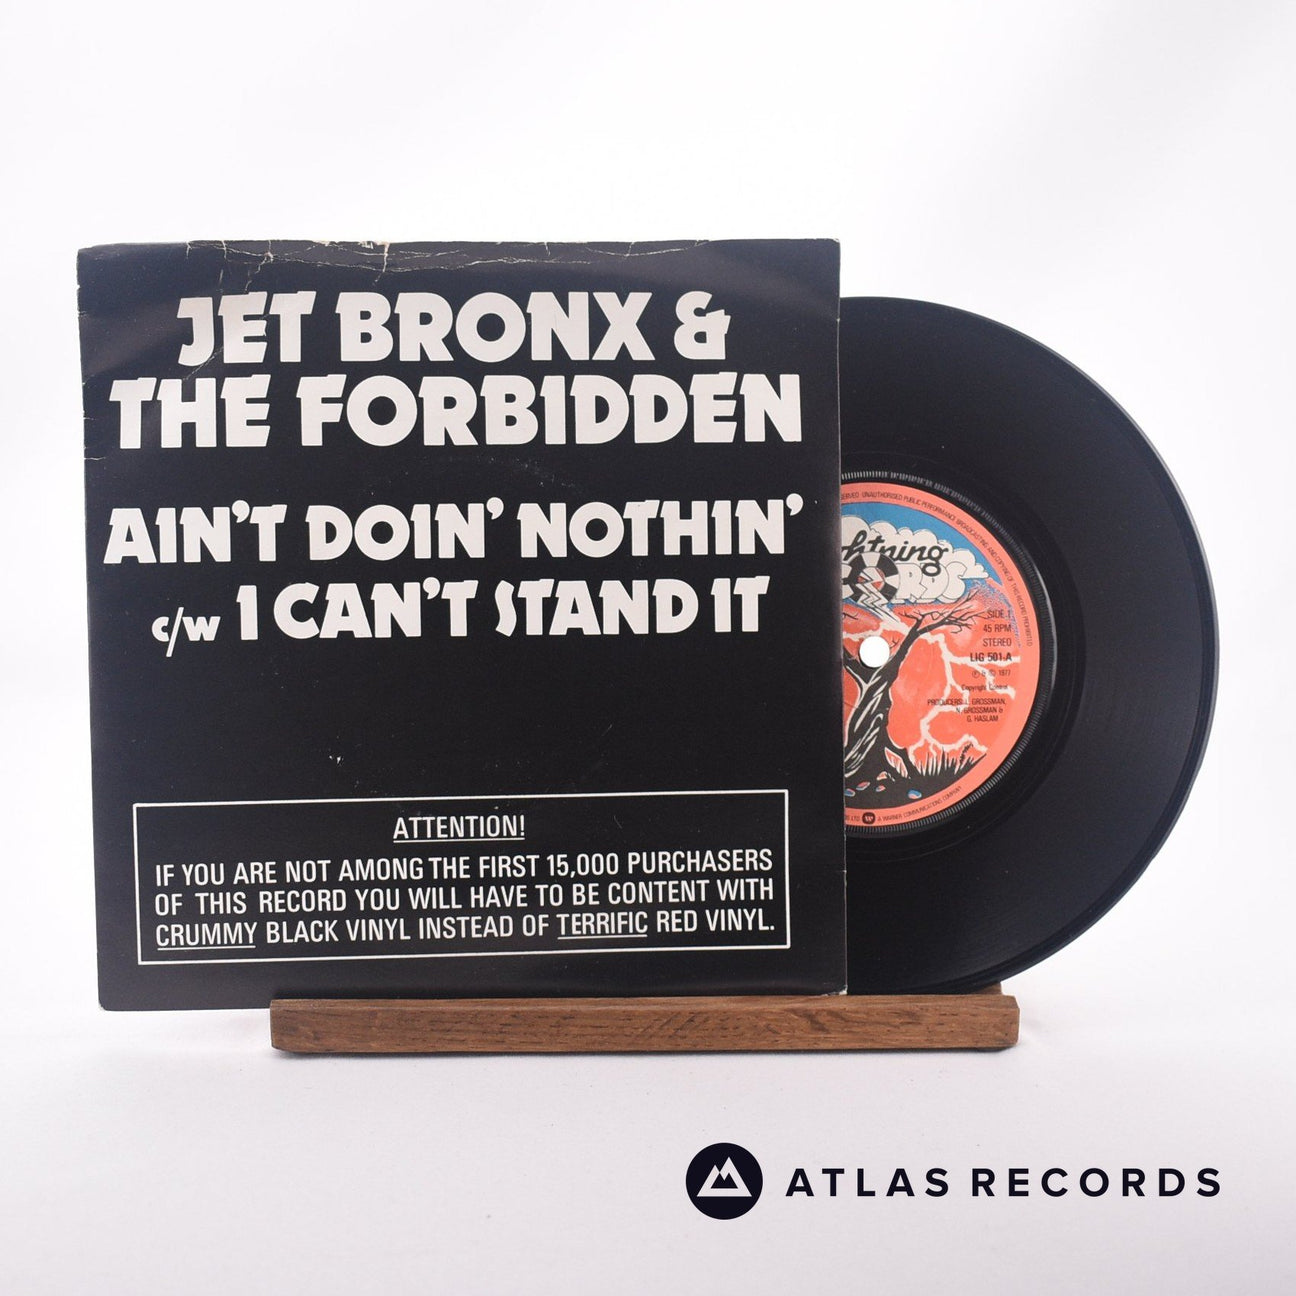 Jet Bronx & The Forbidden Ain't Doin' Nothin' 7" Vinyl Record - Front Cover & Record